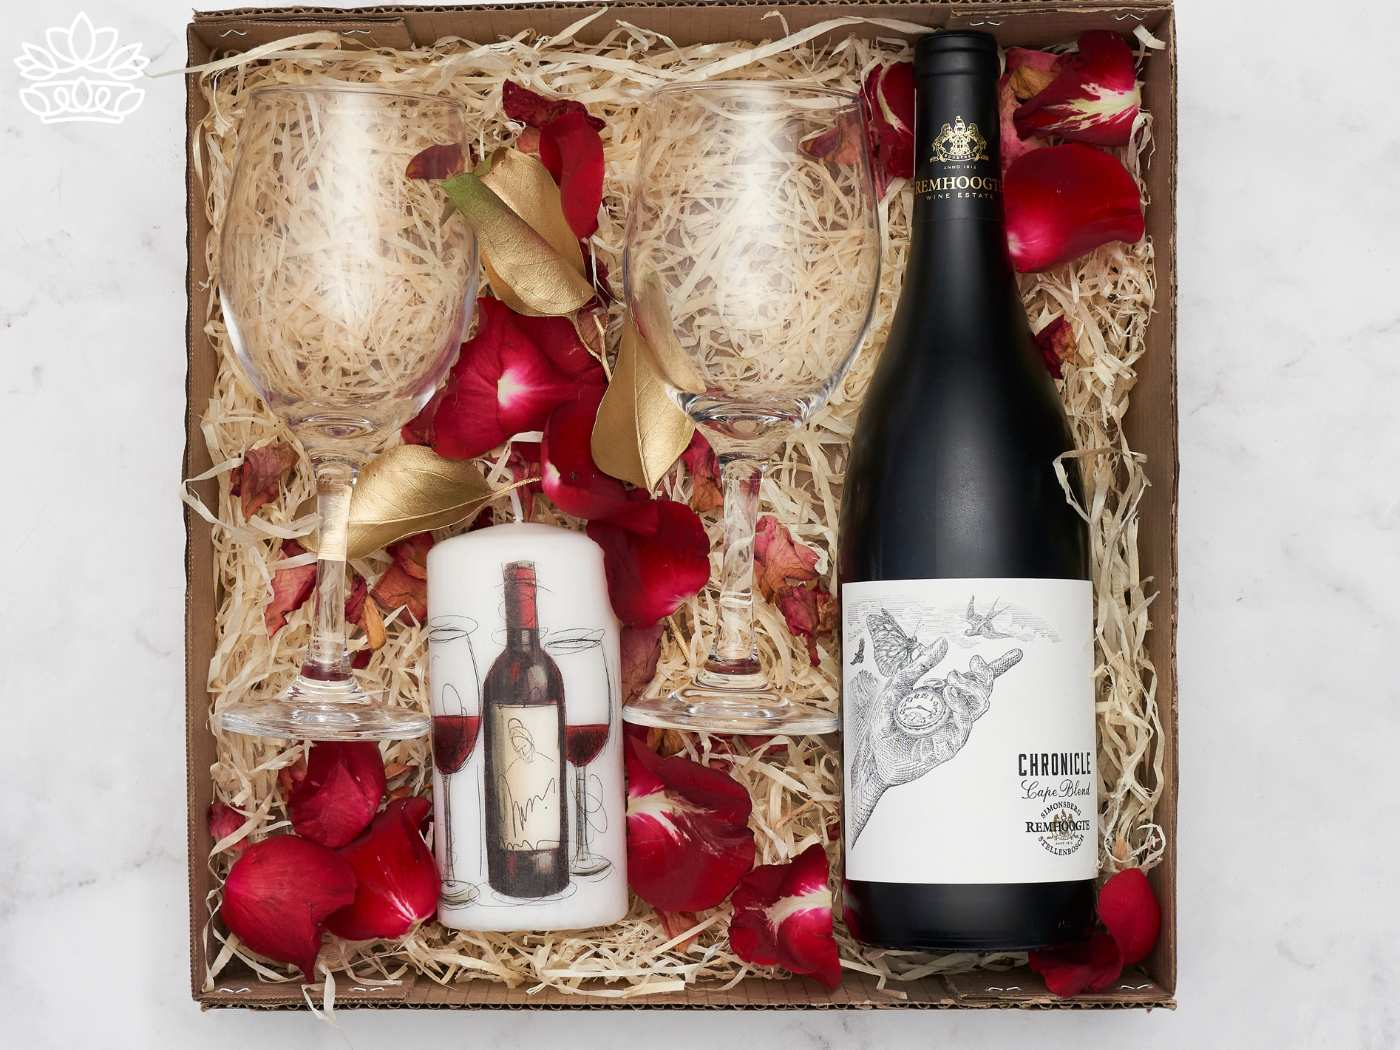 A wine gift box containing a bottle of wine, two glasses, and a candle, with rose petals and golden leaves. Flowers with Champagne & Wine. Delivered with Heart. Fabulous Flowers and Gifts.